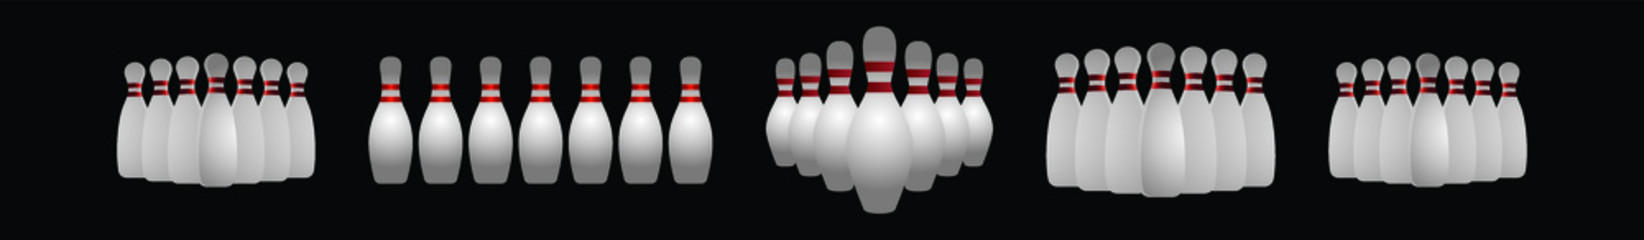 group of bowling pins. icon design template with various models. vector illustration